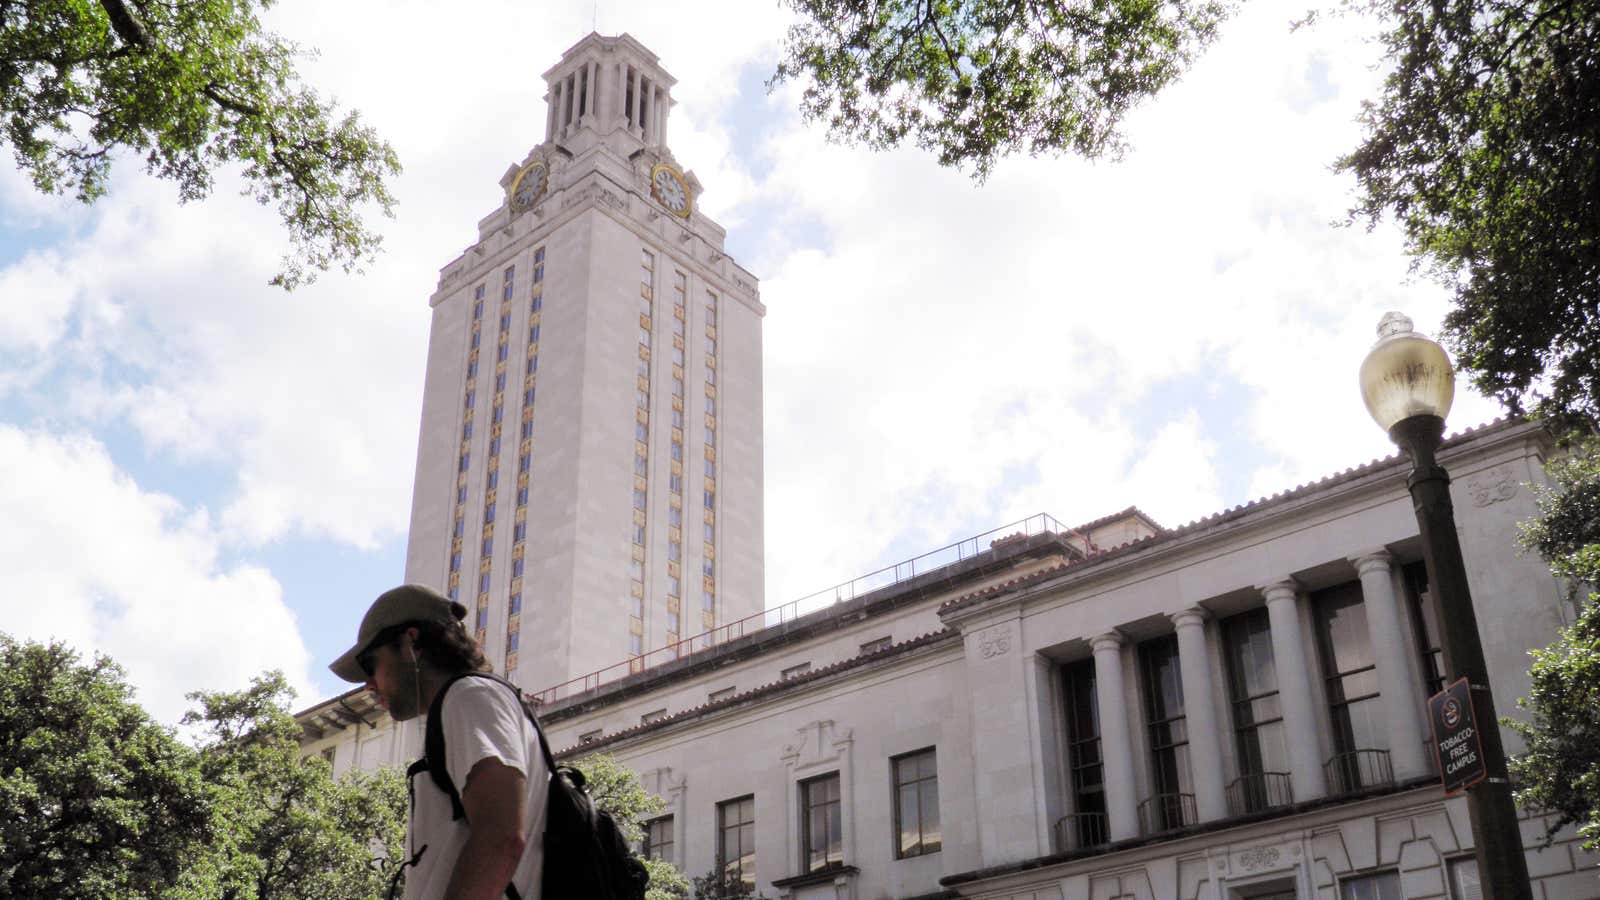 One was killed and three injured in a stabbing at the University of Texas.